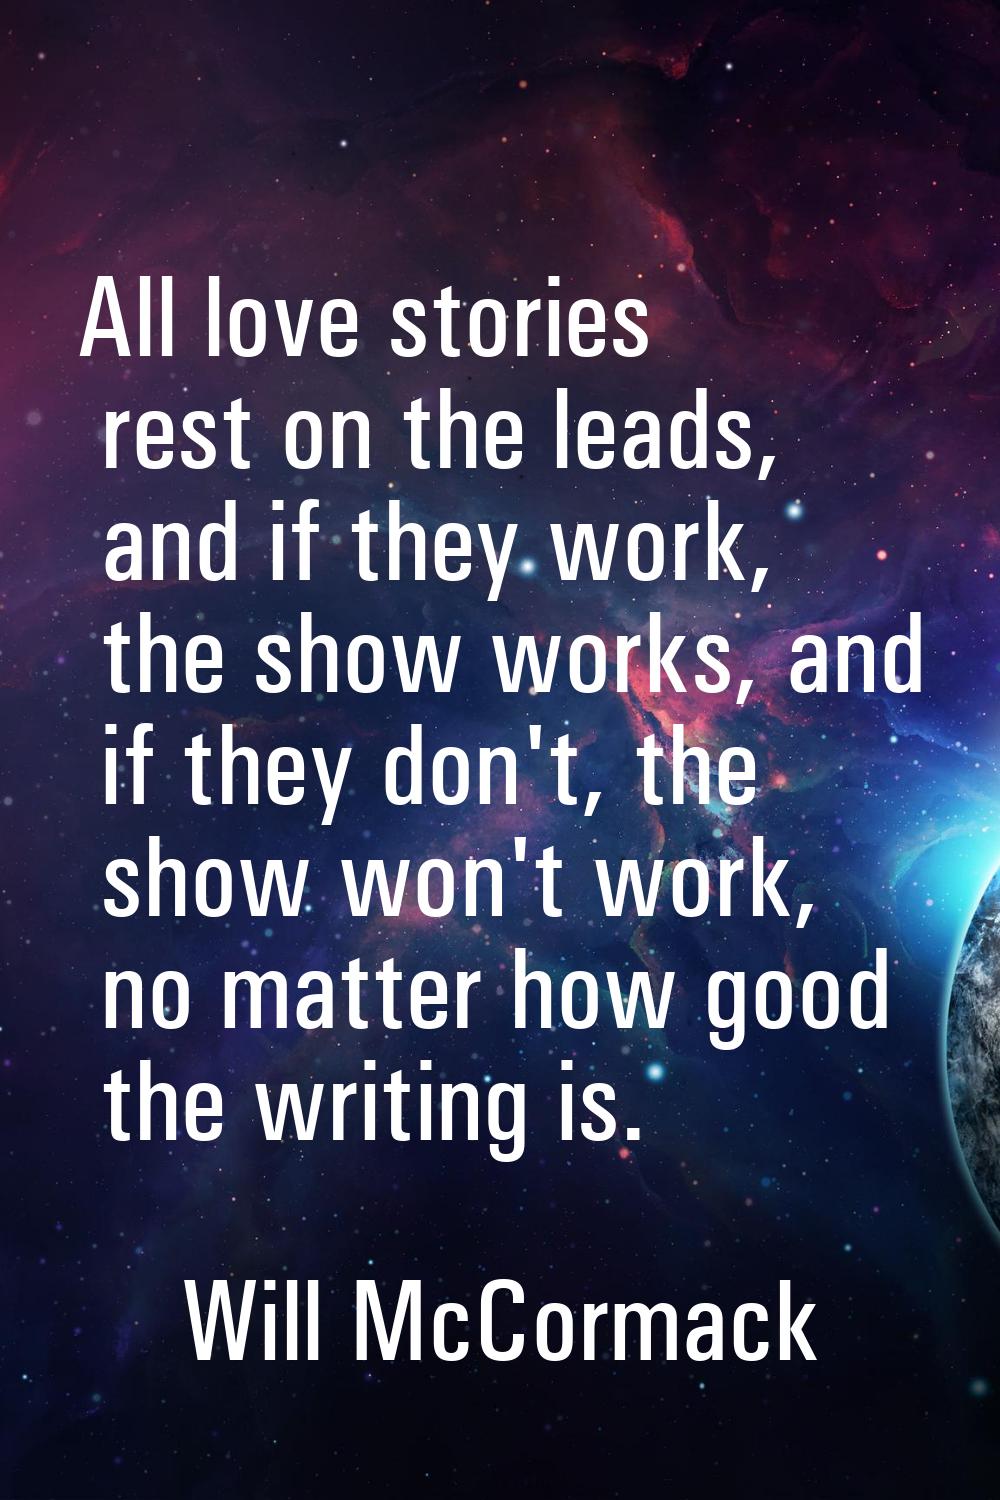 All love stories rest on the leads, and if they work, the show works, and if they don't, the show w